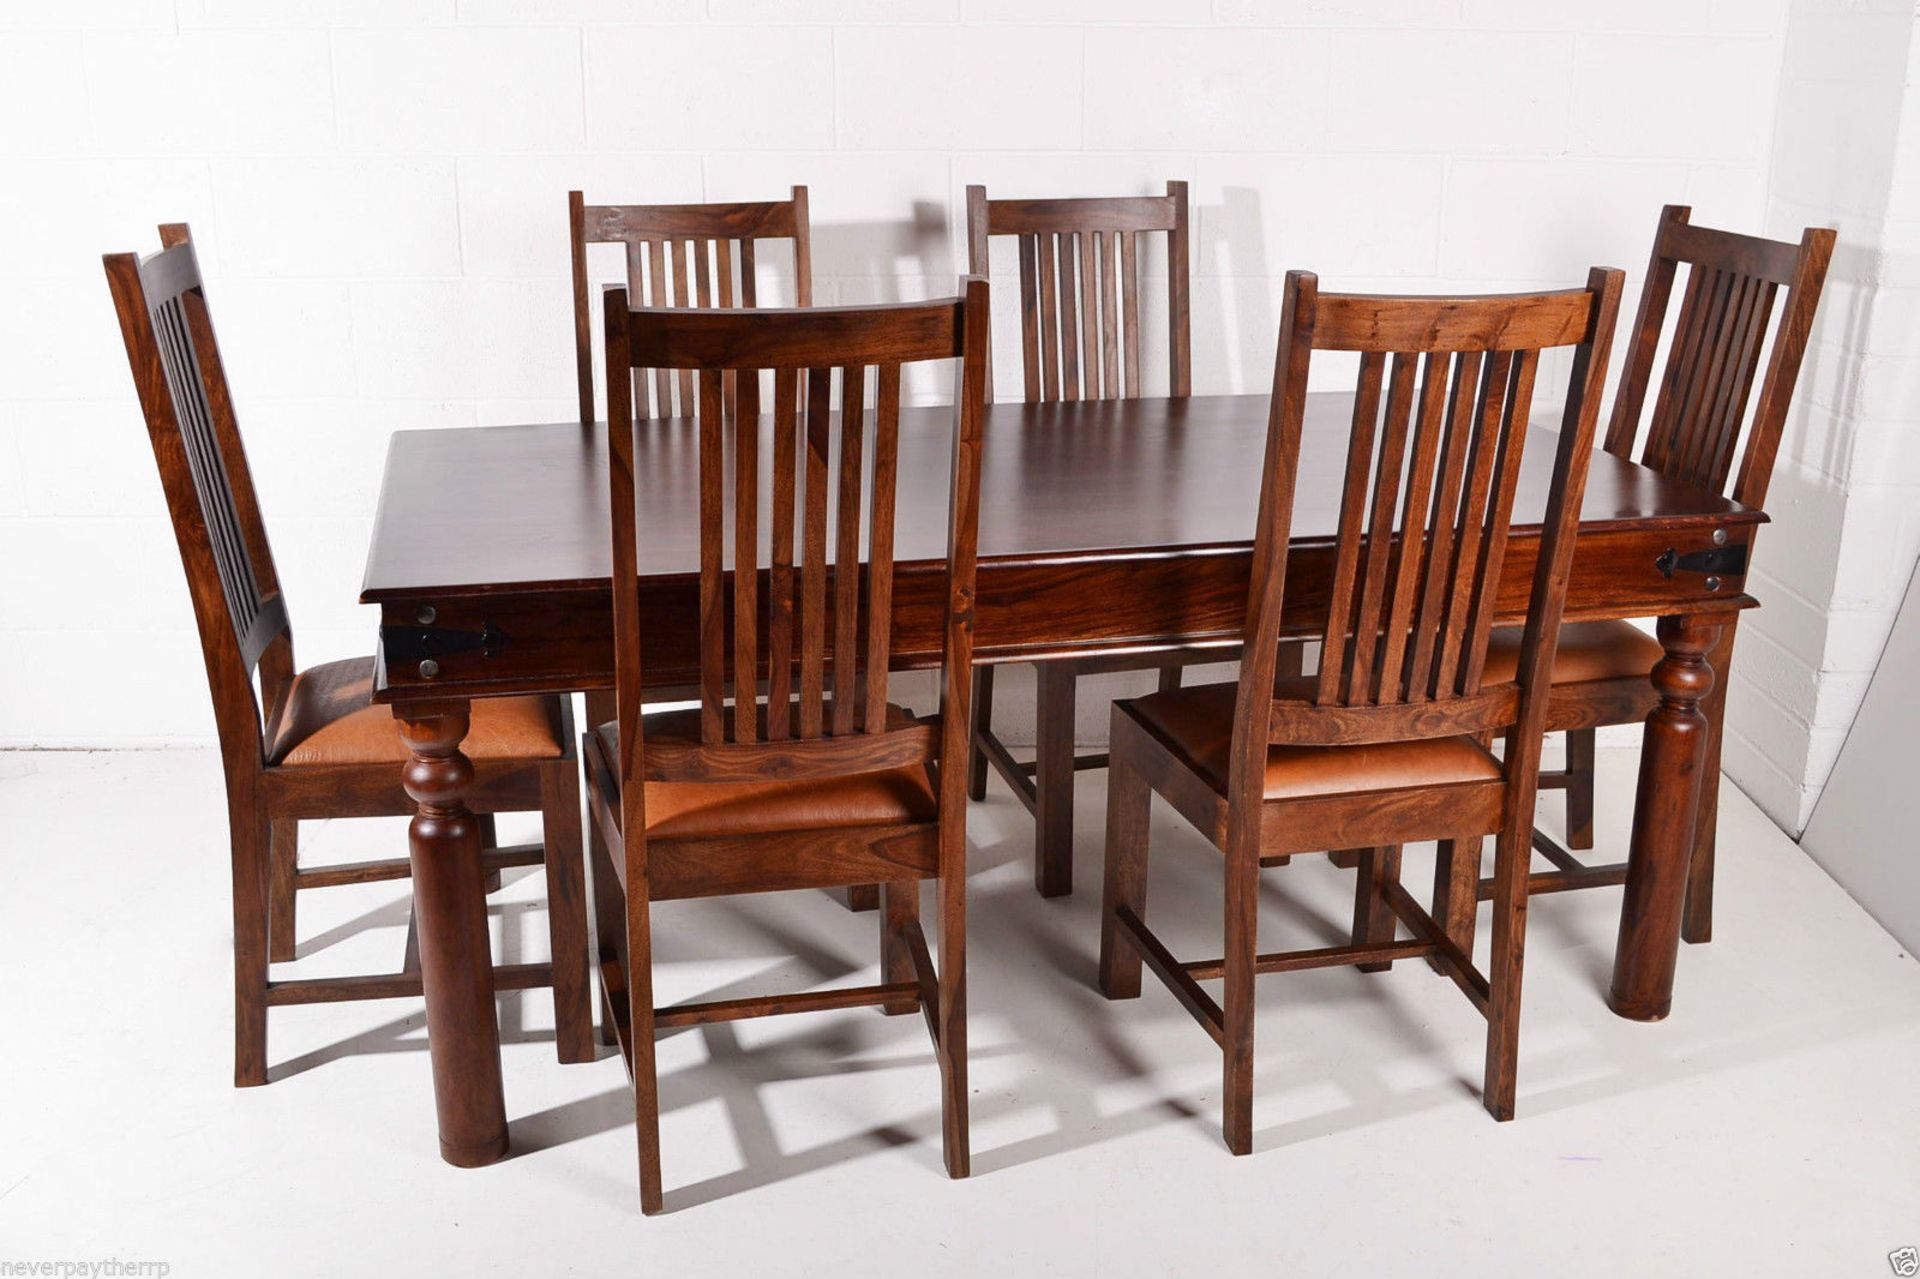 NEW JOHN LEWIS Maharani Dining Table & 6 Chair Set.  6 Seater table dimen sions: 180 x 95cm RRP £